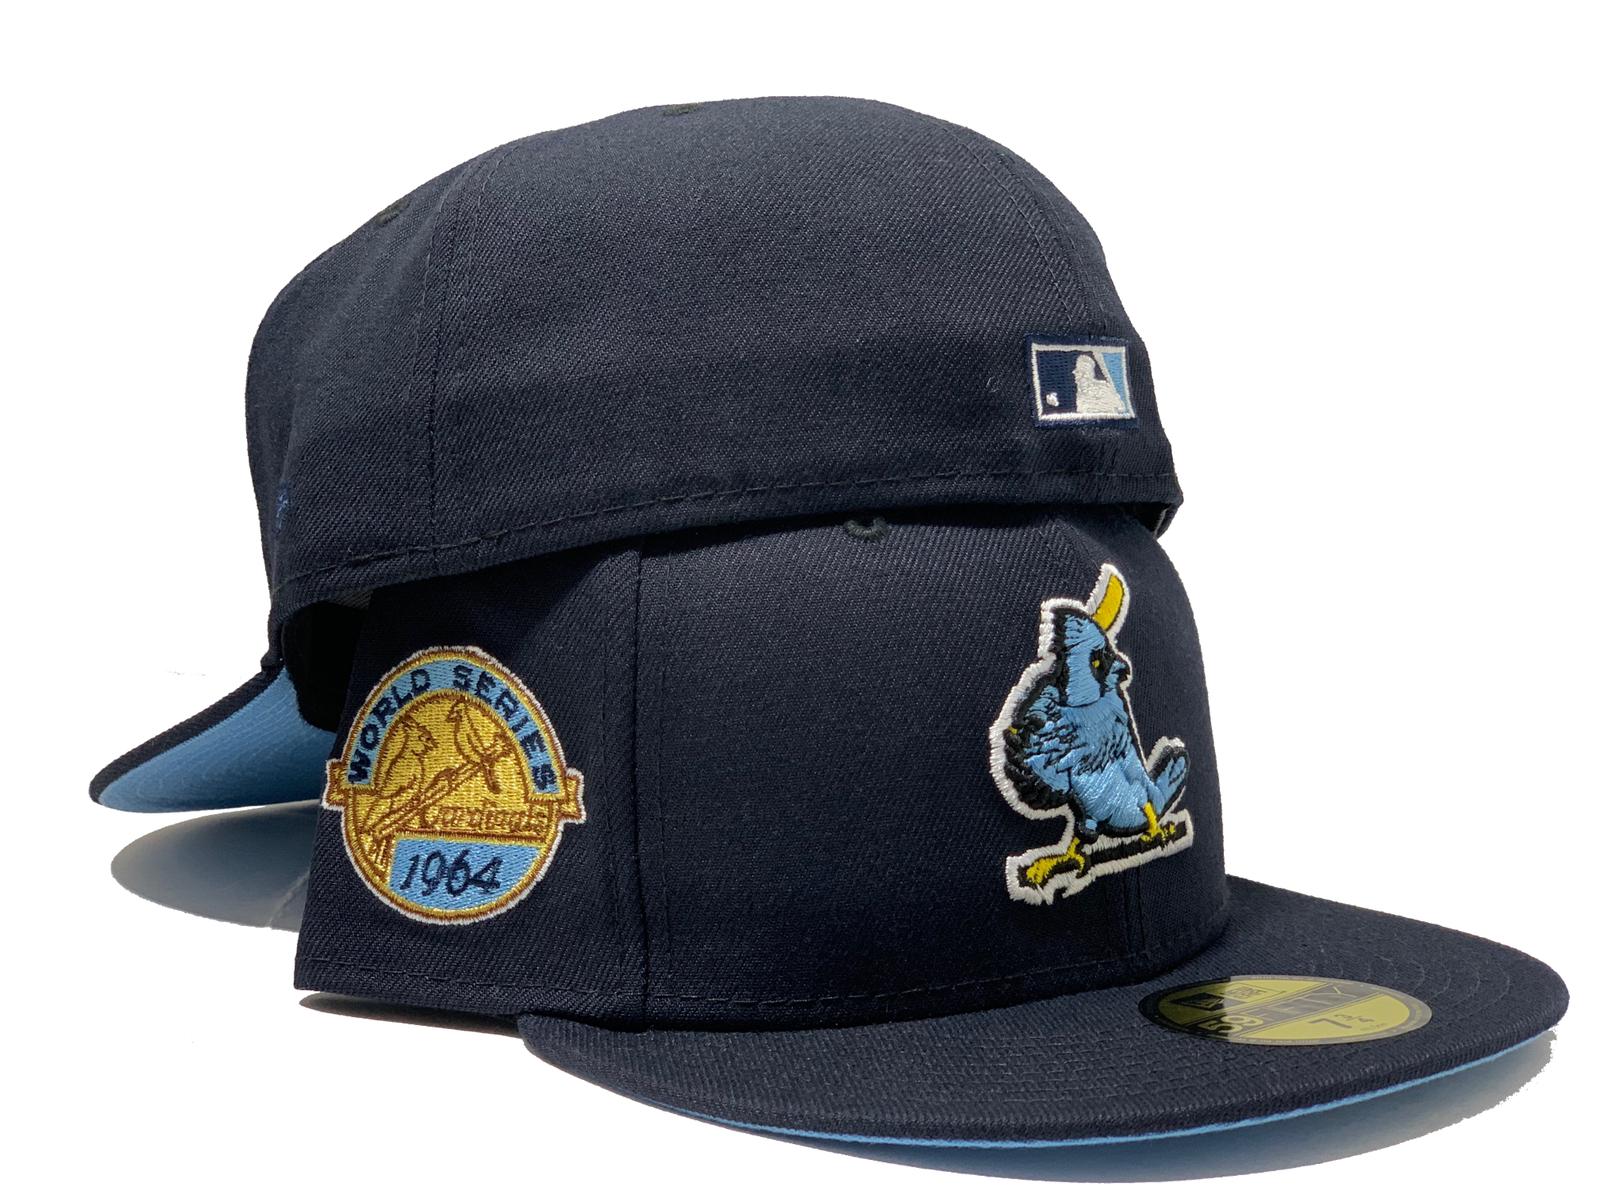 ST. LOUIS CARDINALS 1964 WORLD SERIES NAVY ICY BRIM NEW ERA FITTED